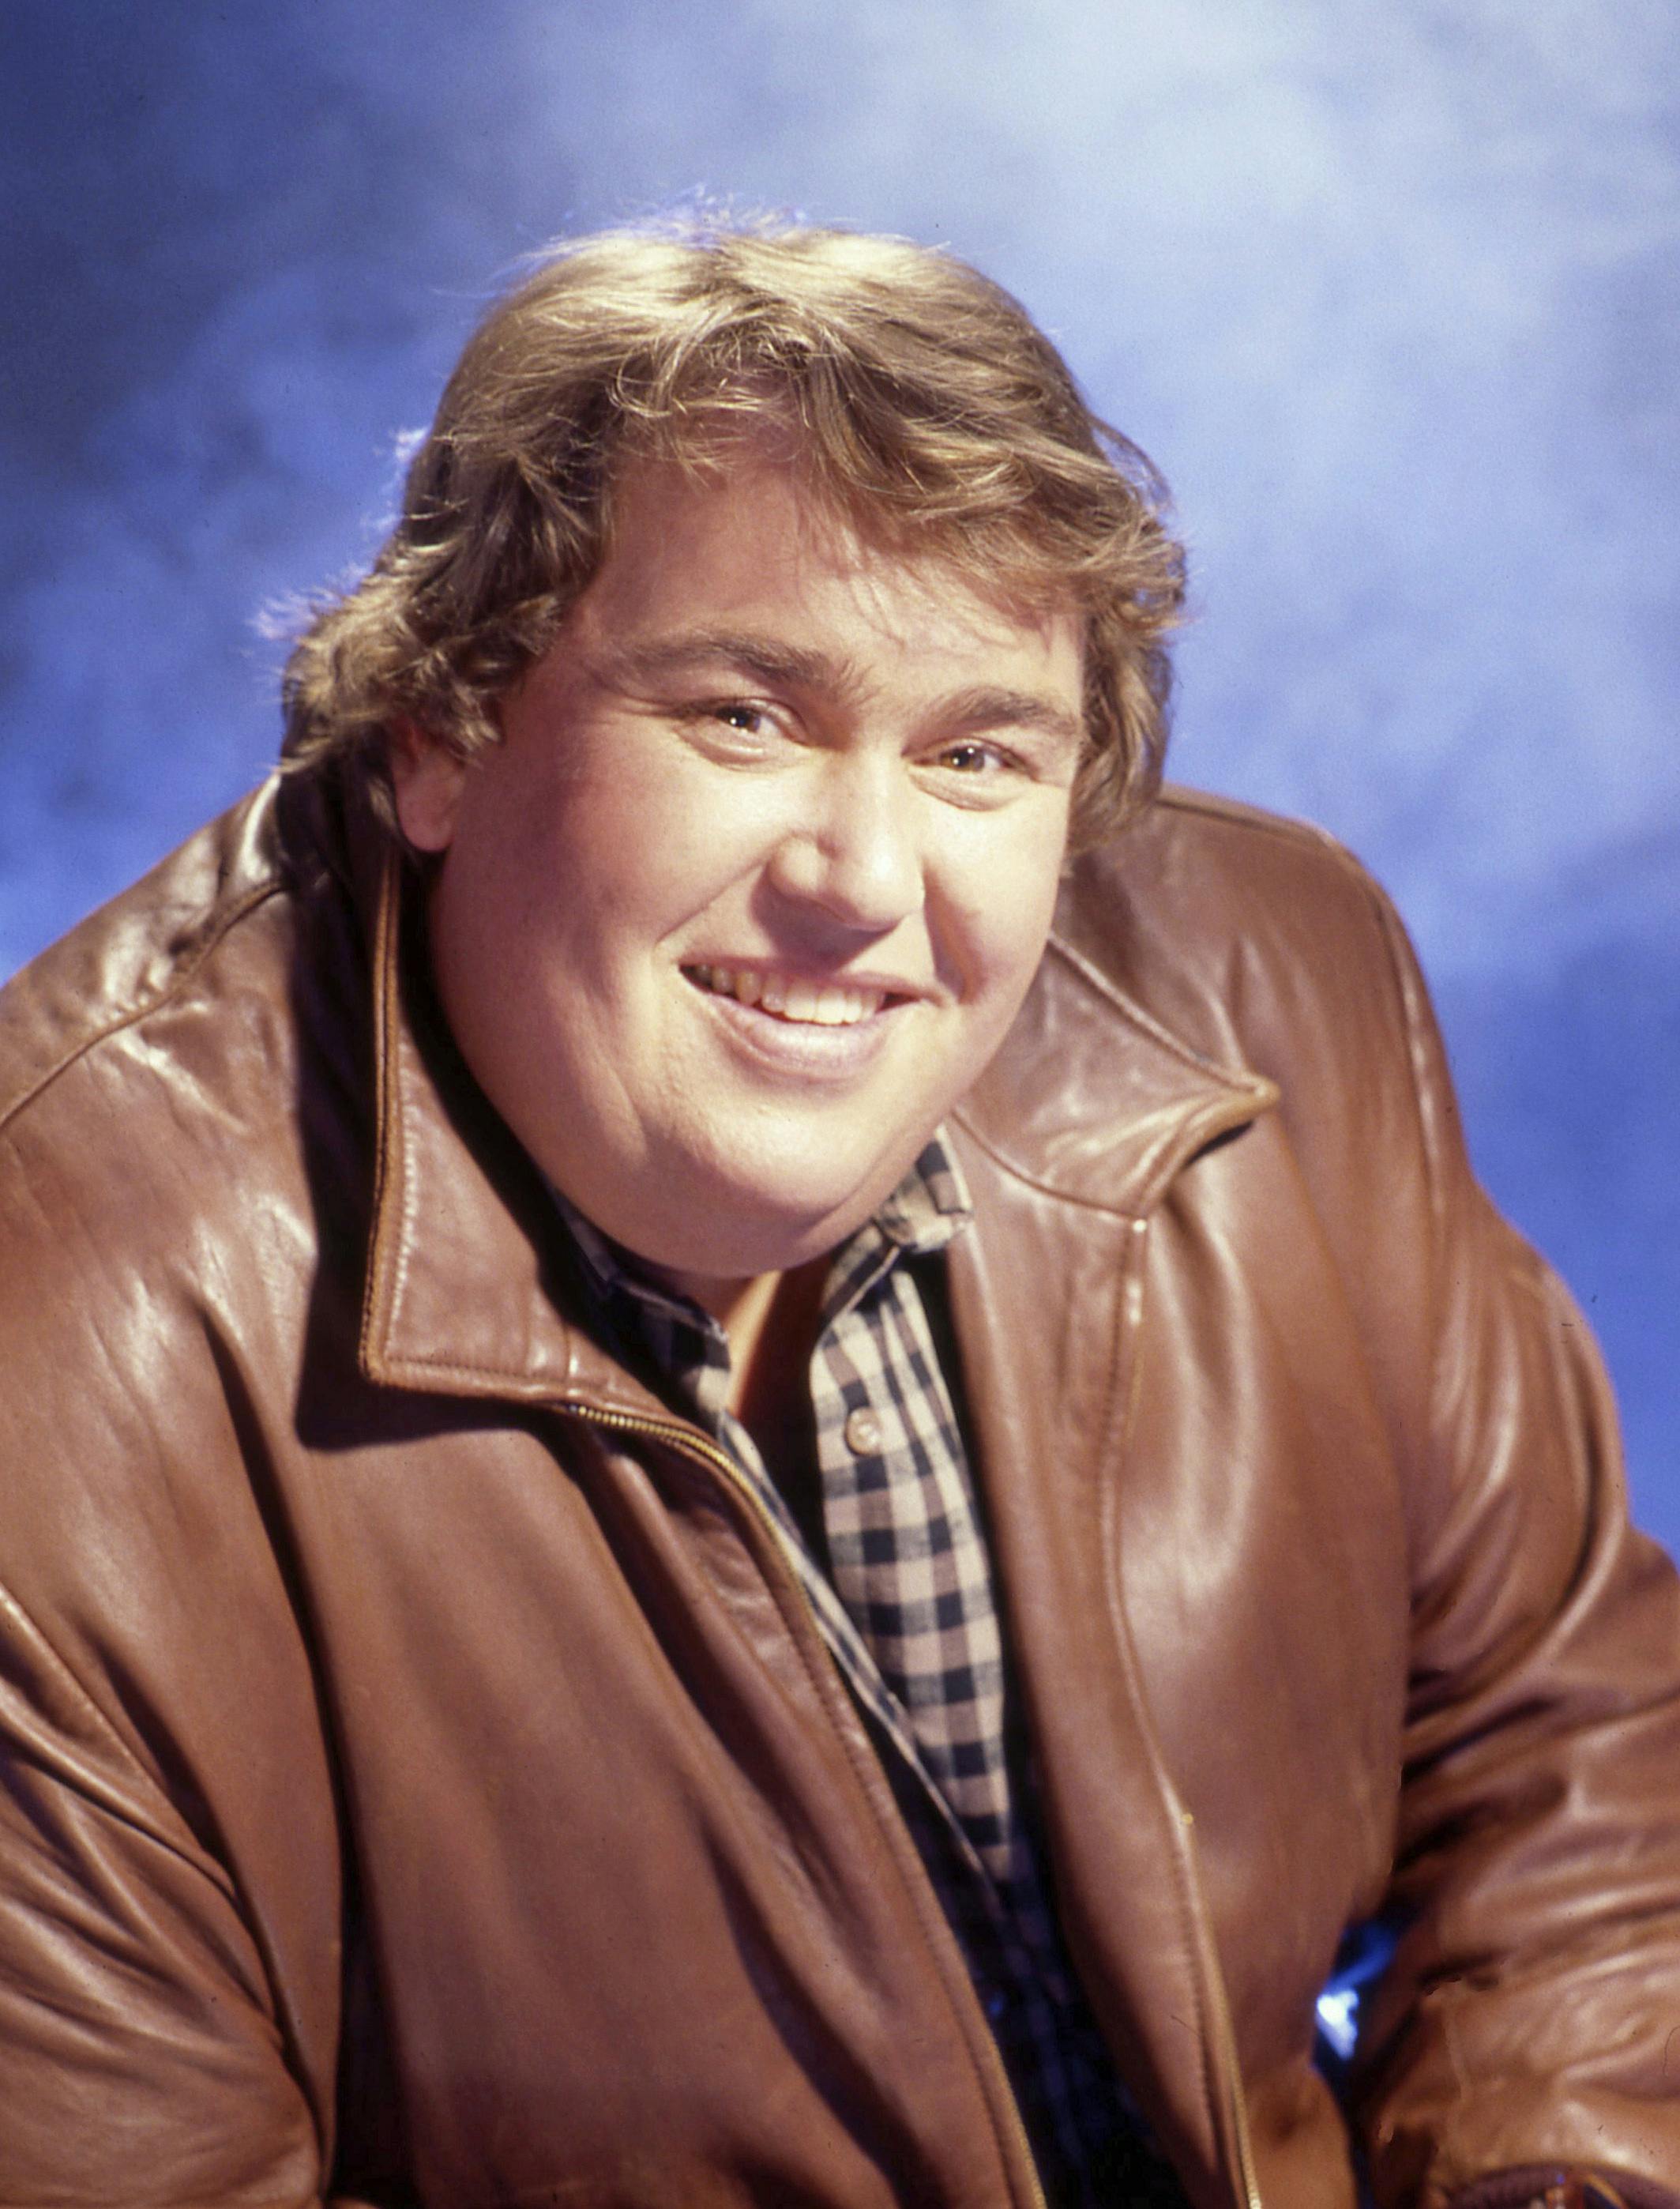 John Candy poses for a portrait in 1992 in Los Angeles, California. Credit: Harry Langdon /Rock Negatives /MediaPunch /IPX